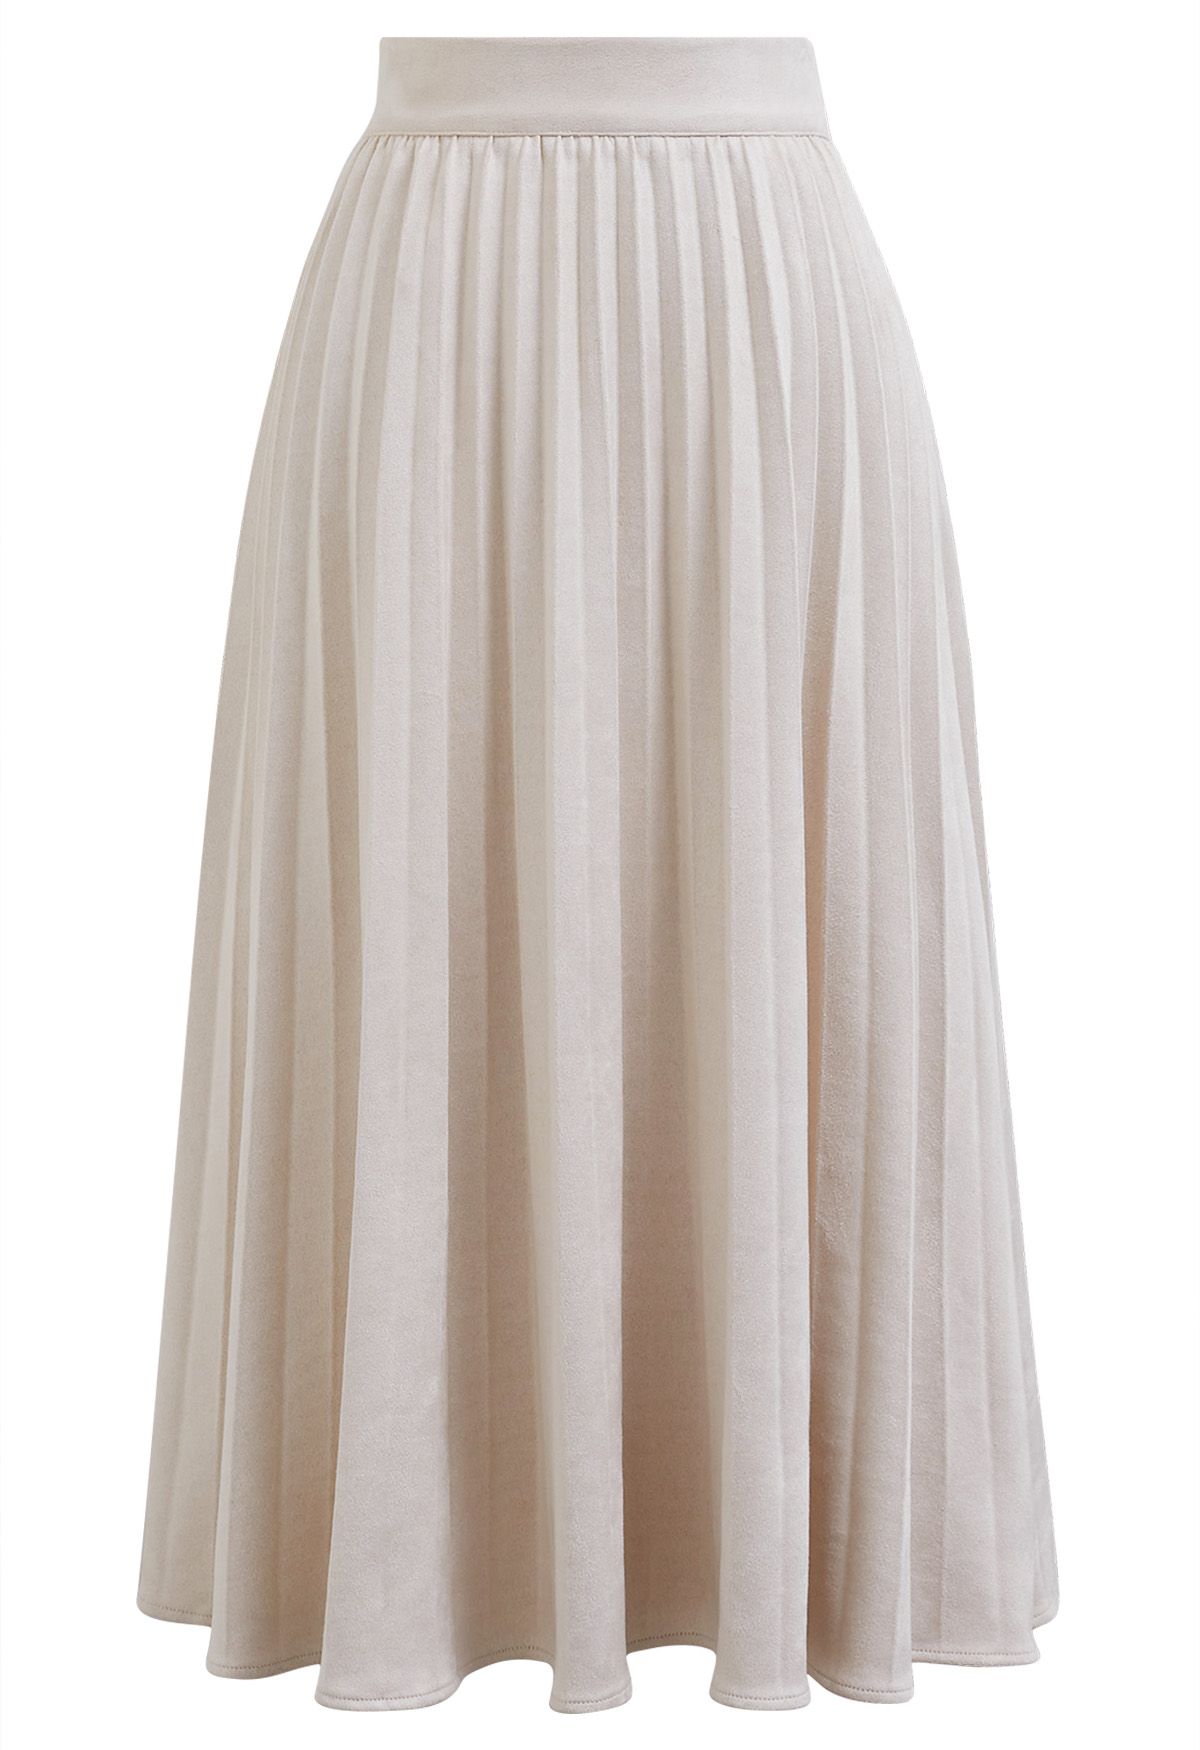 Smooth Faux Suede Pleated Midi Skirt in Ivory